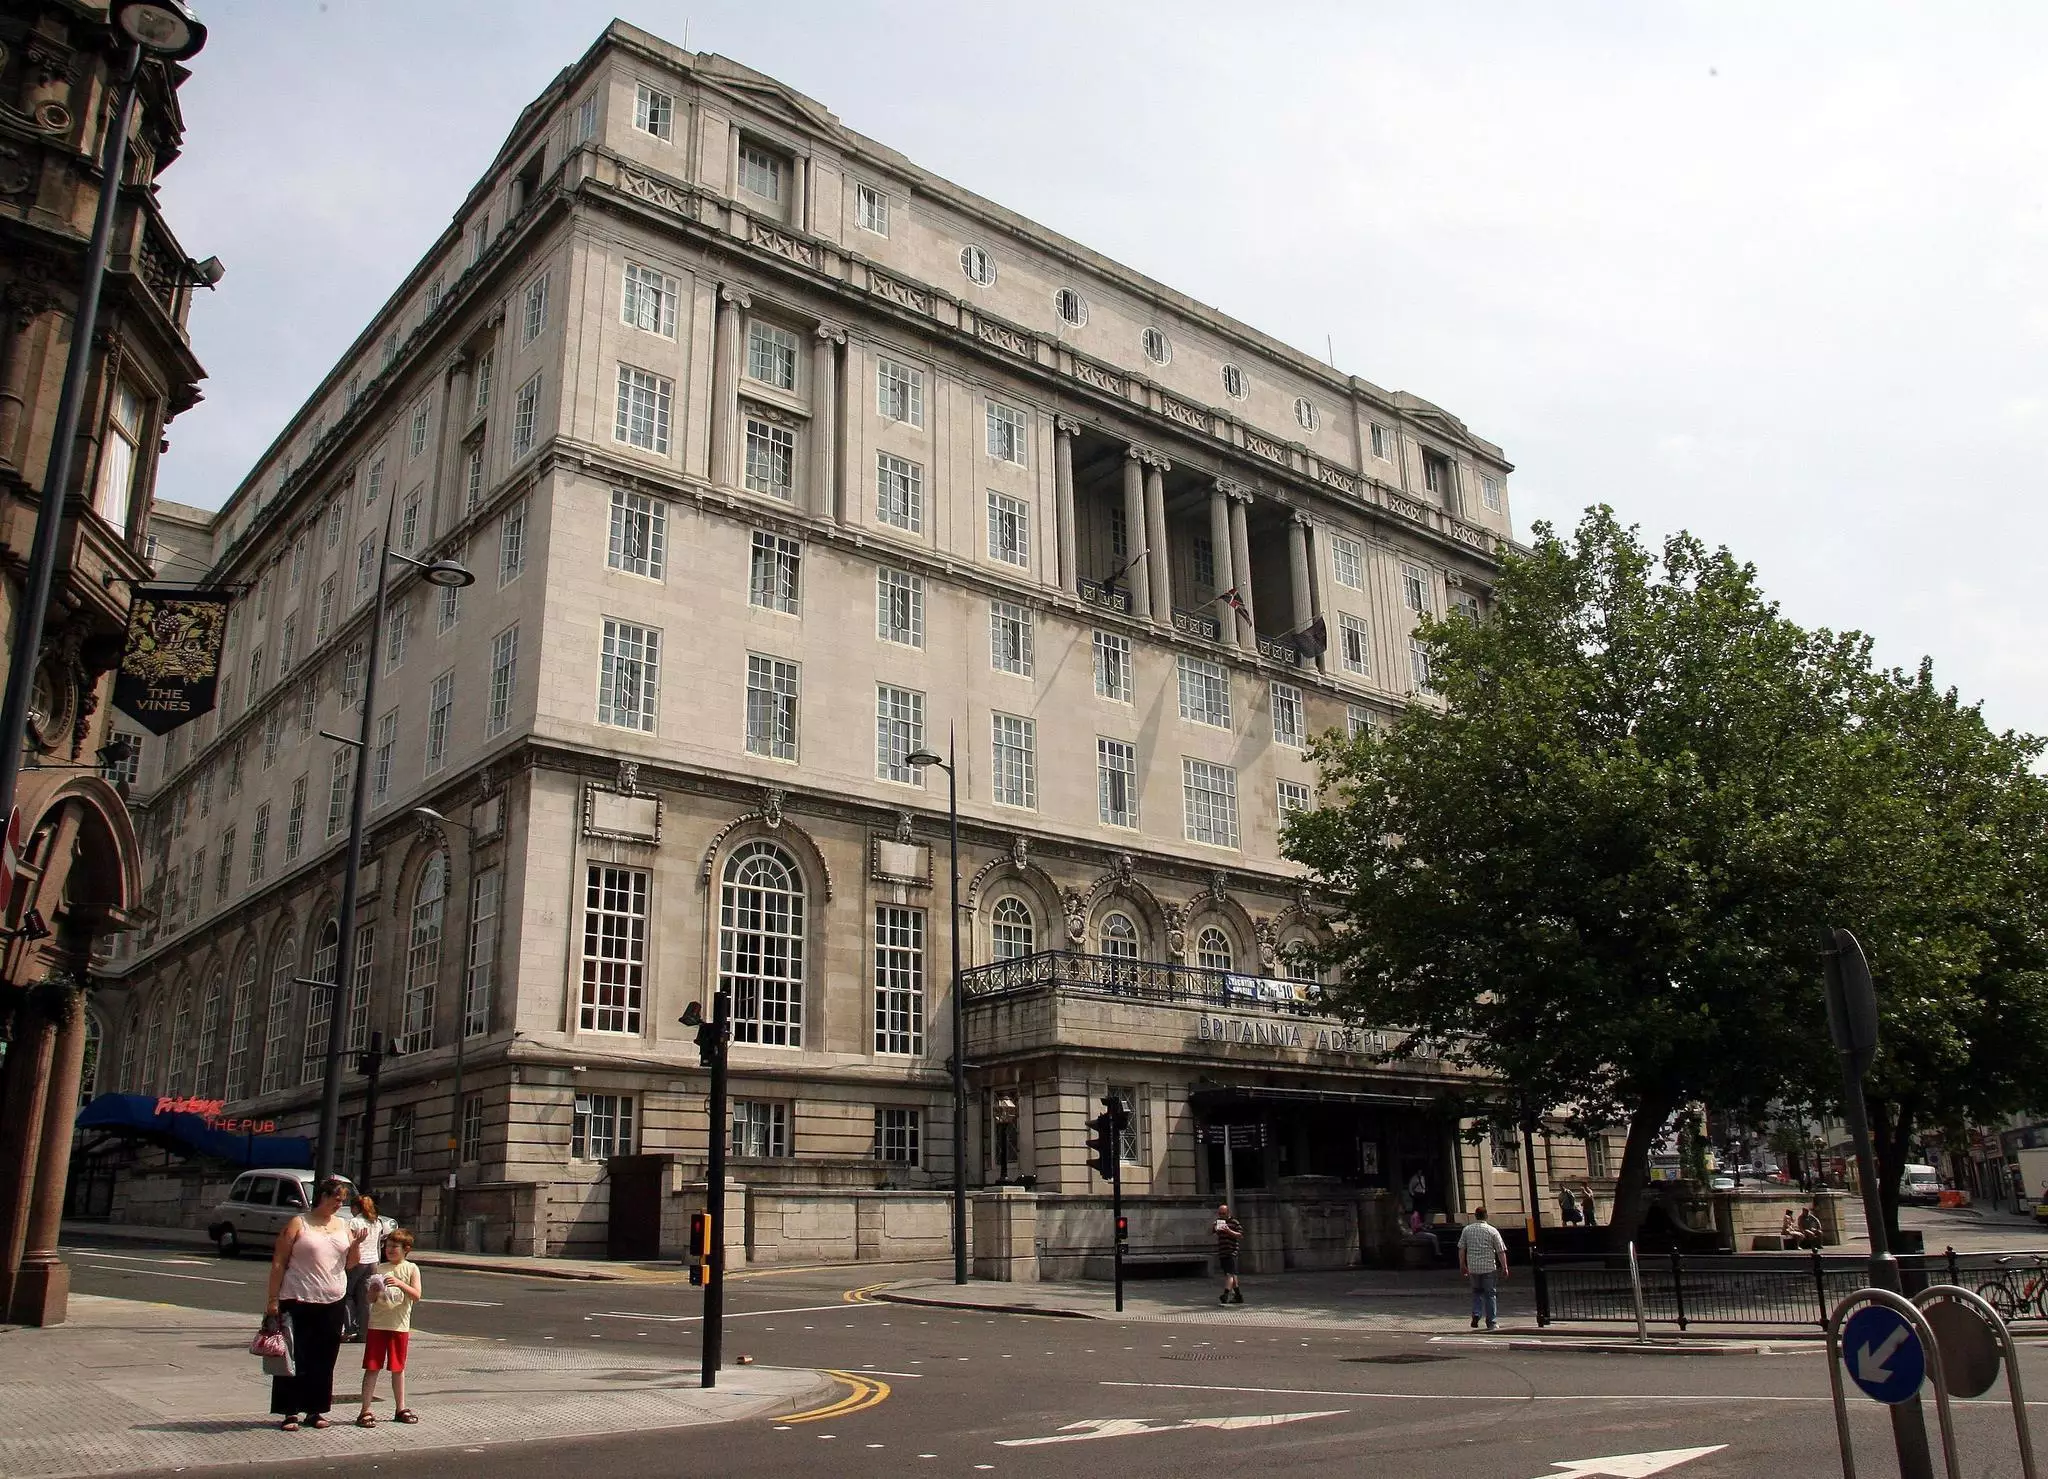 The Adelphi has been dubbed the spookiest hotel in Britain. (